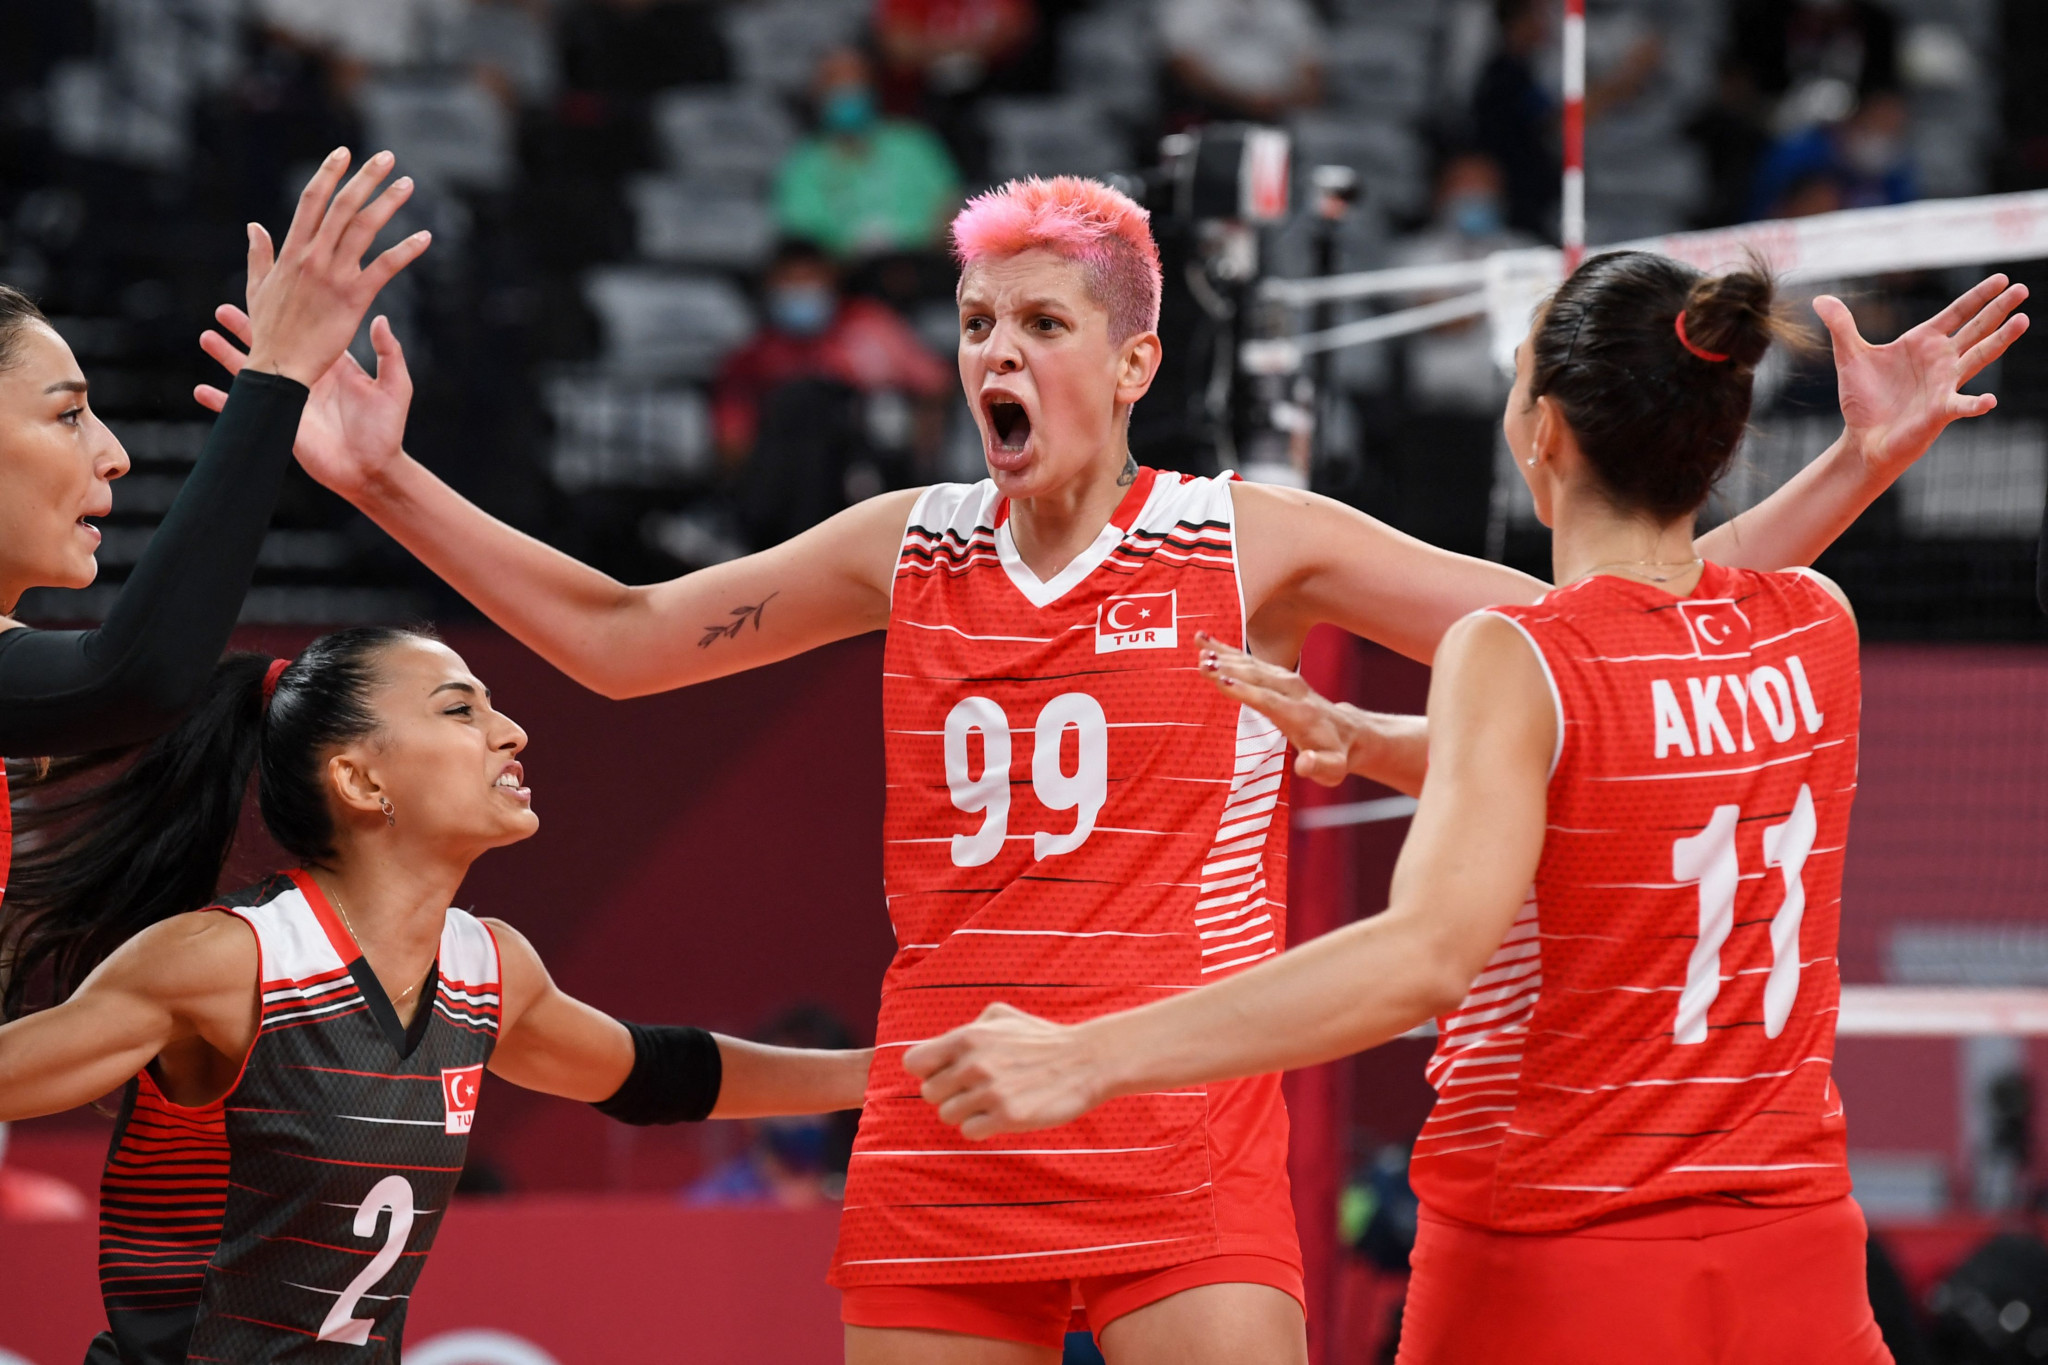 Mixed fortunes for co-hosts on opening day of 2021 Women's EuroVolley